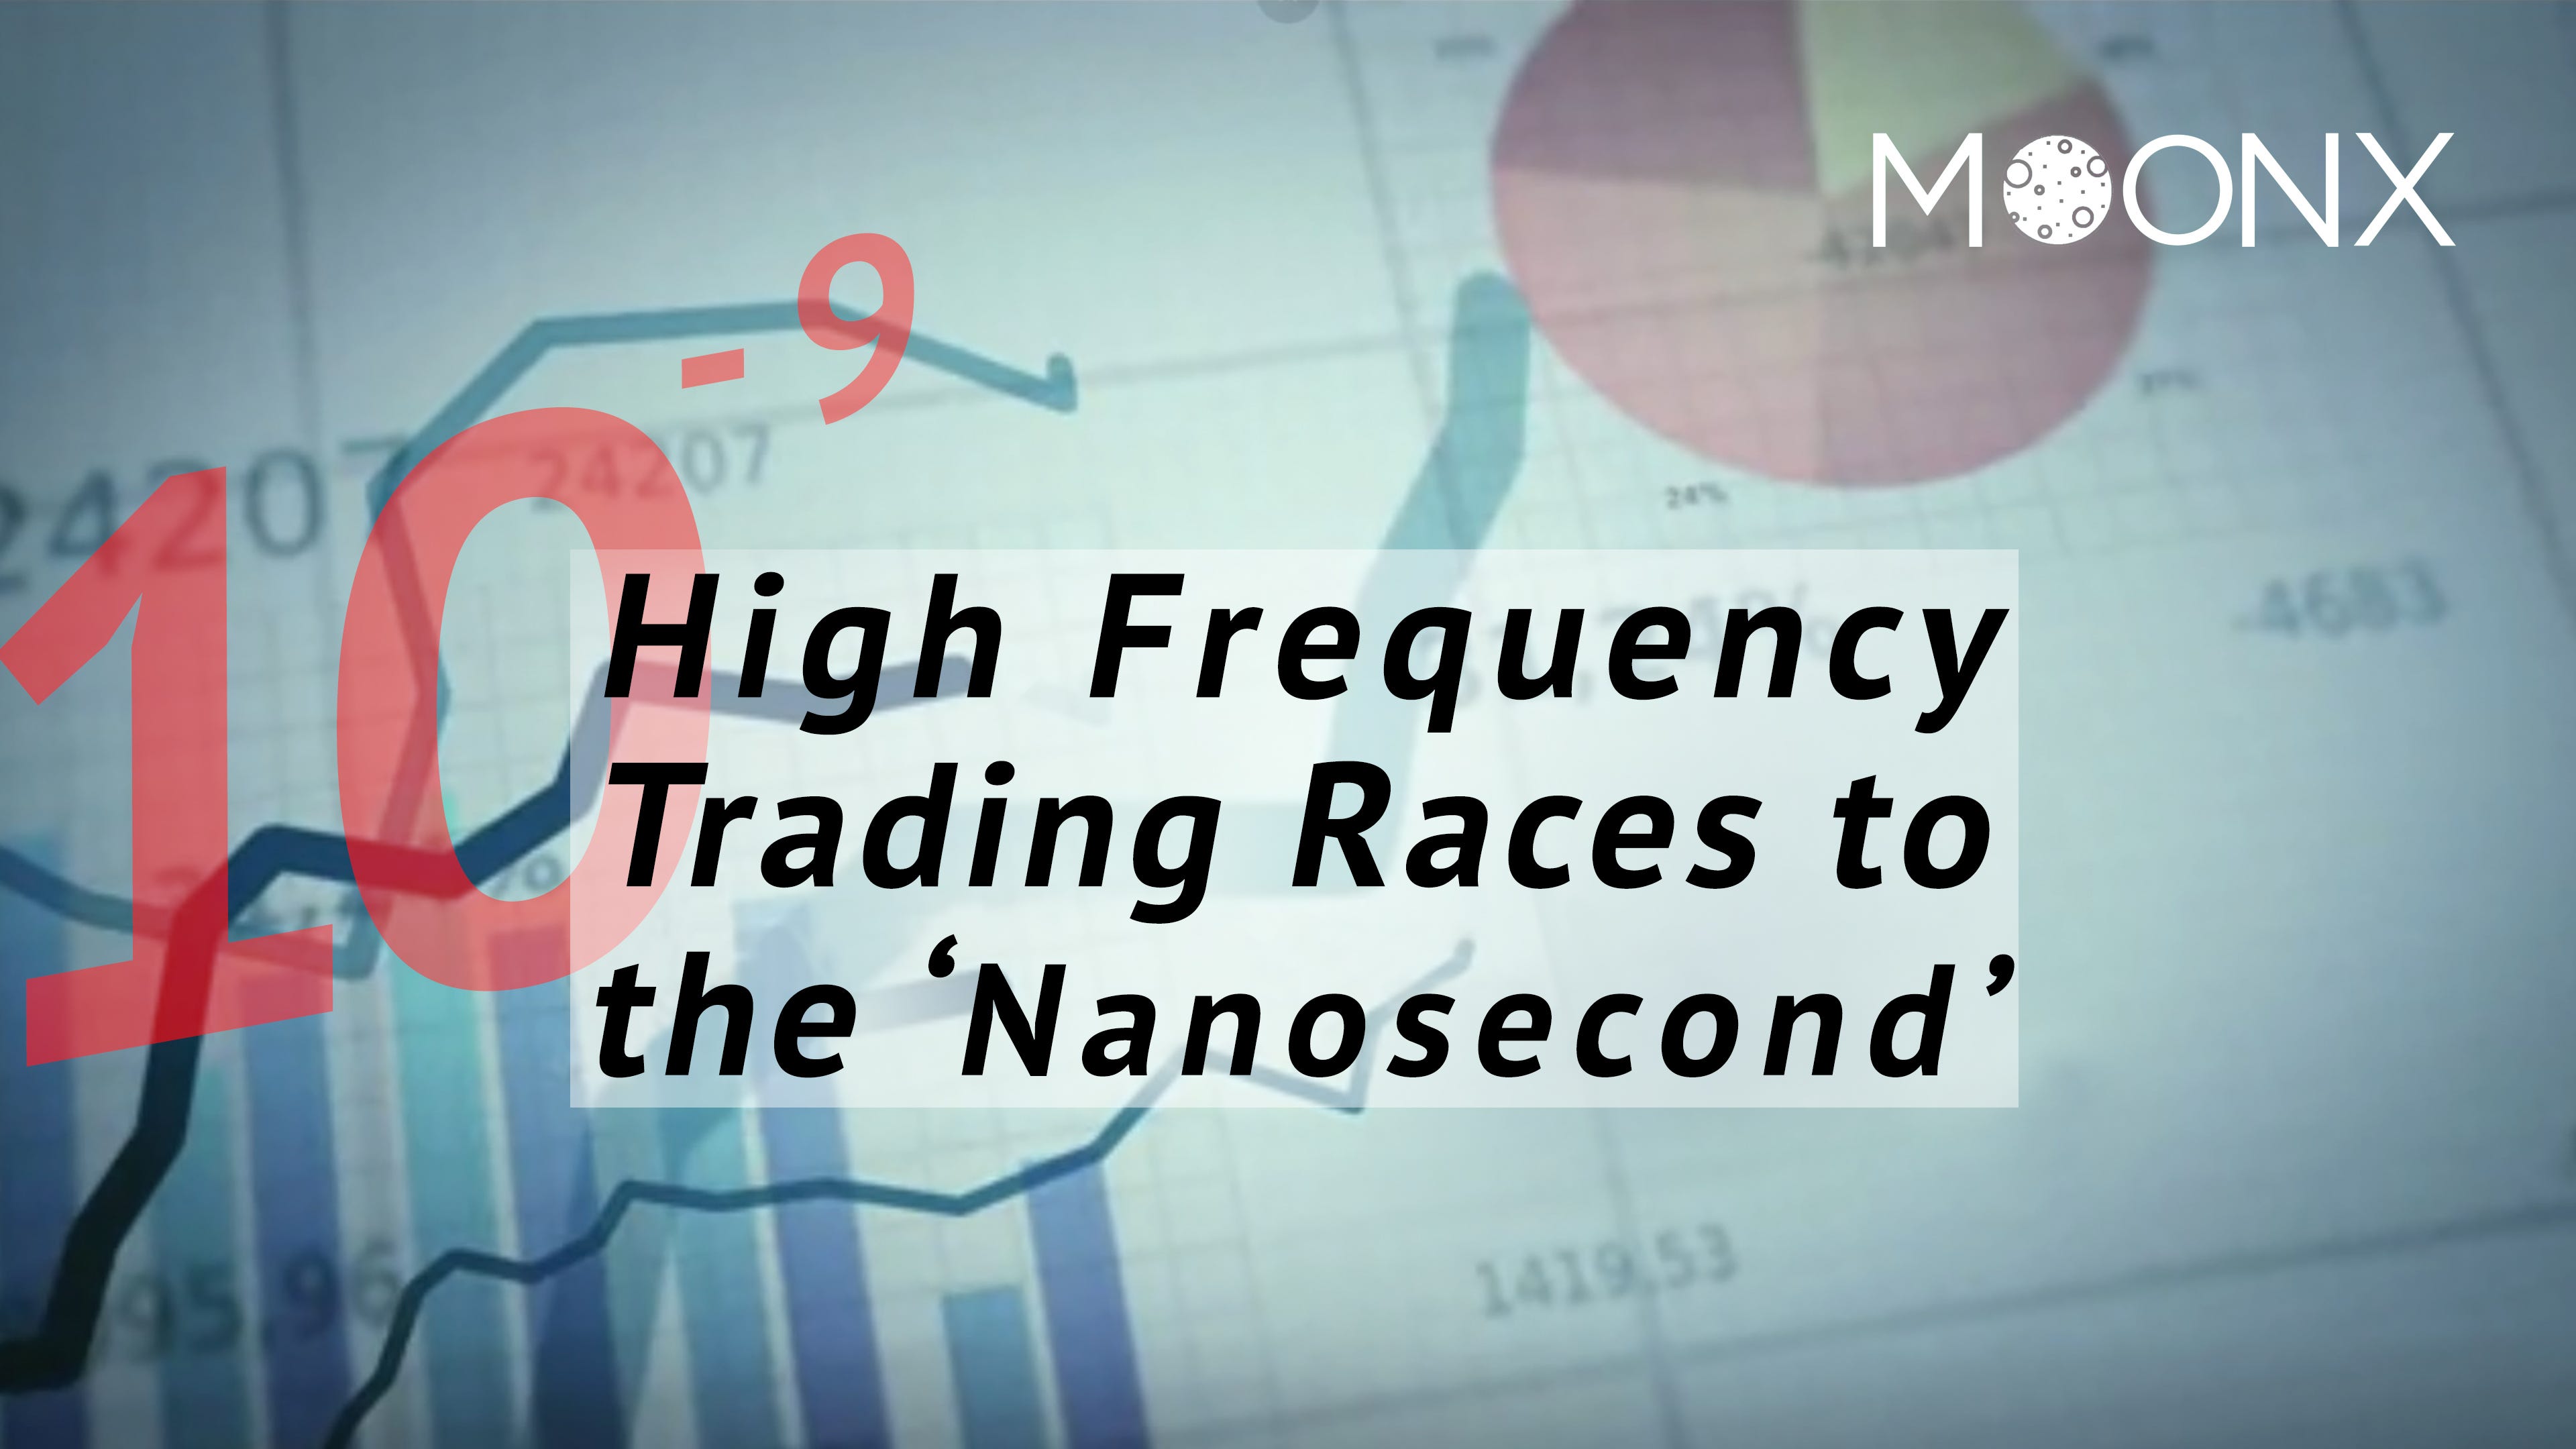 New Alternatives to High-Frequency Trading Software